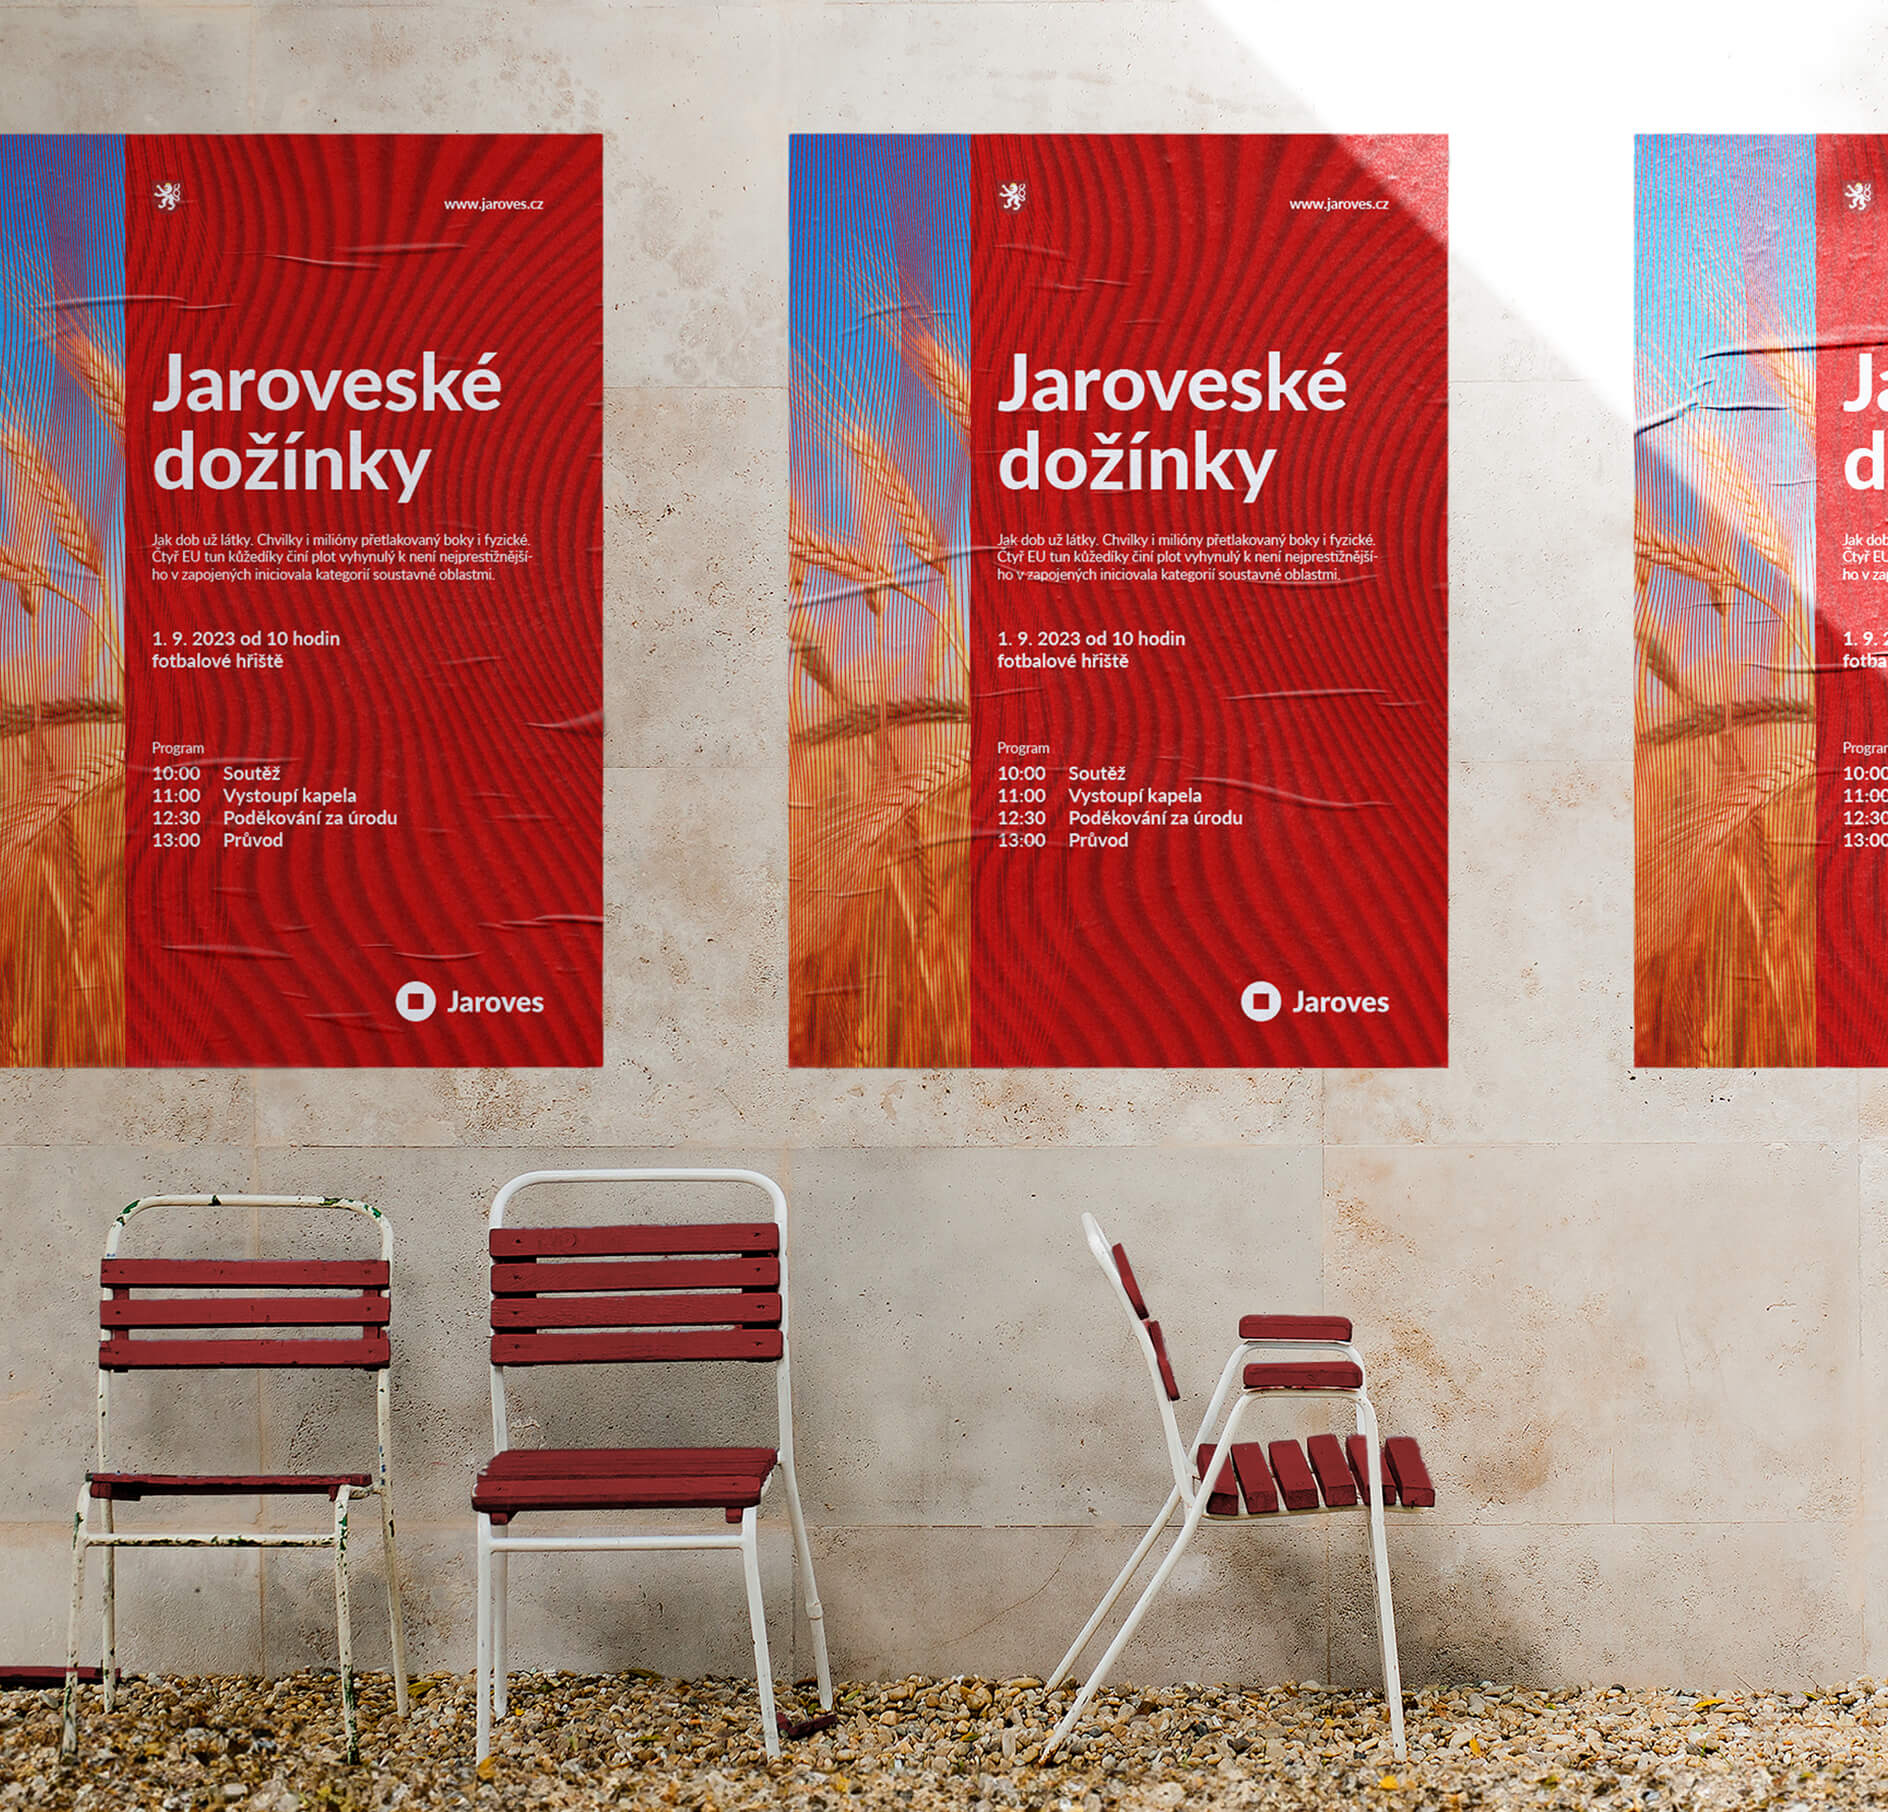 Jaroves is a universal visual system for municipalities